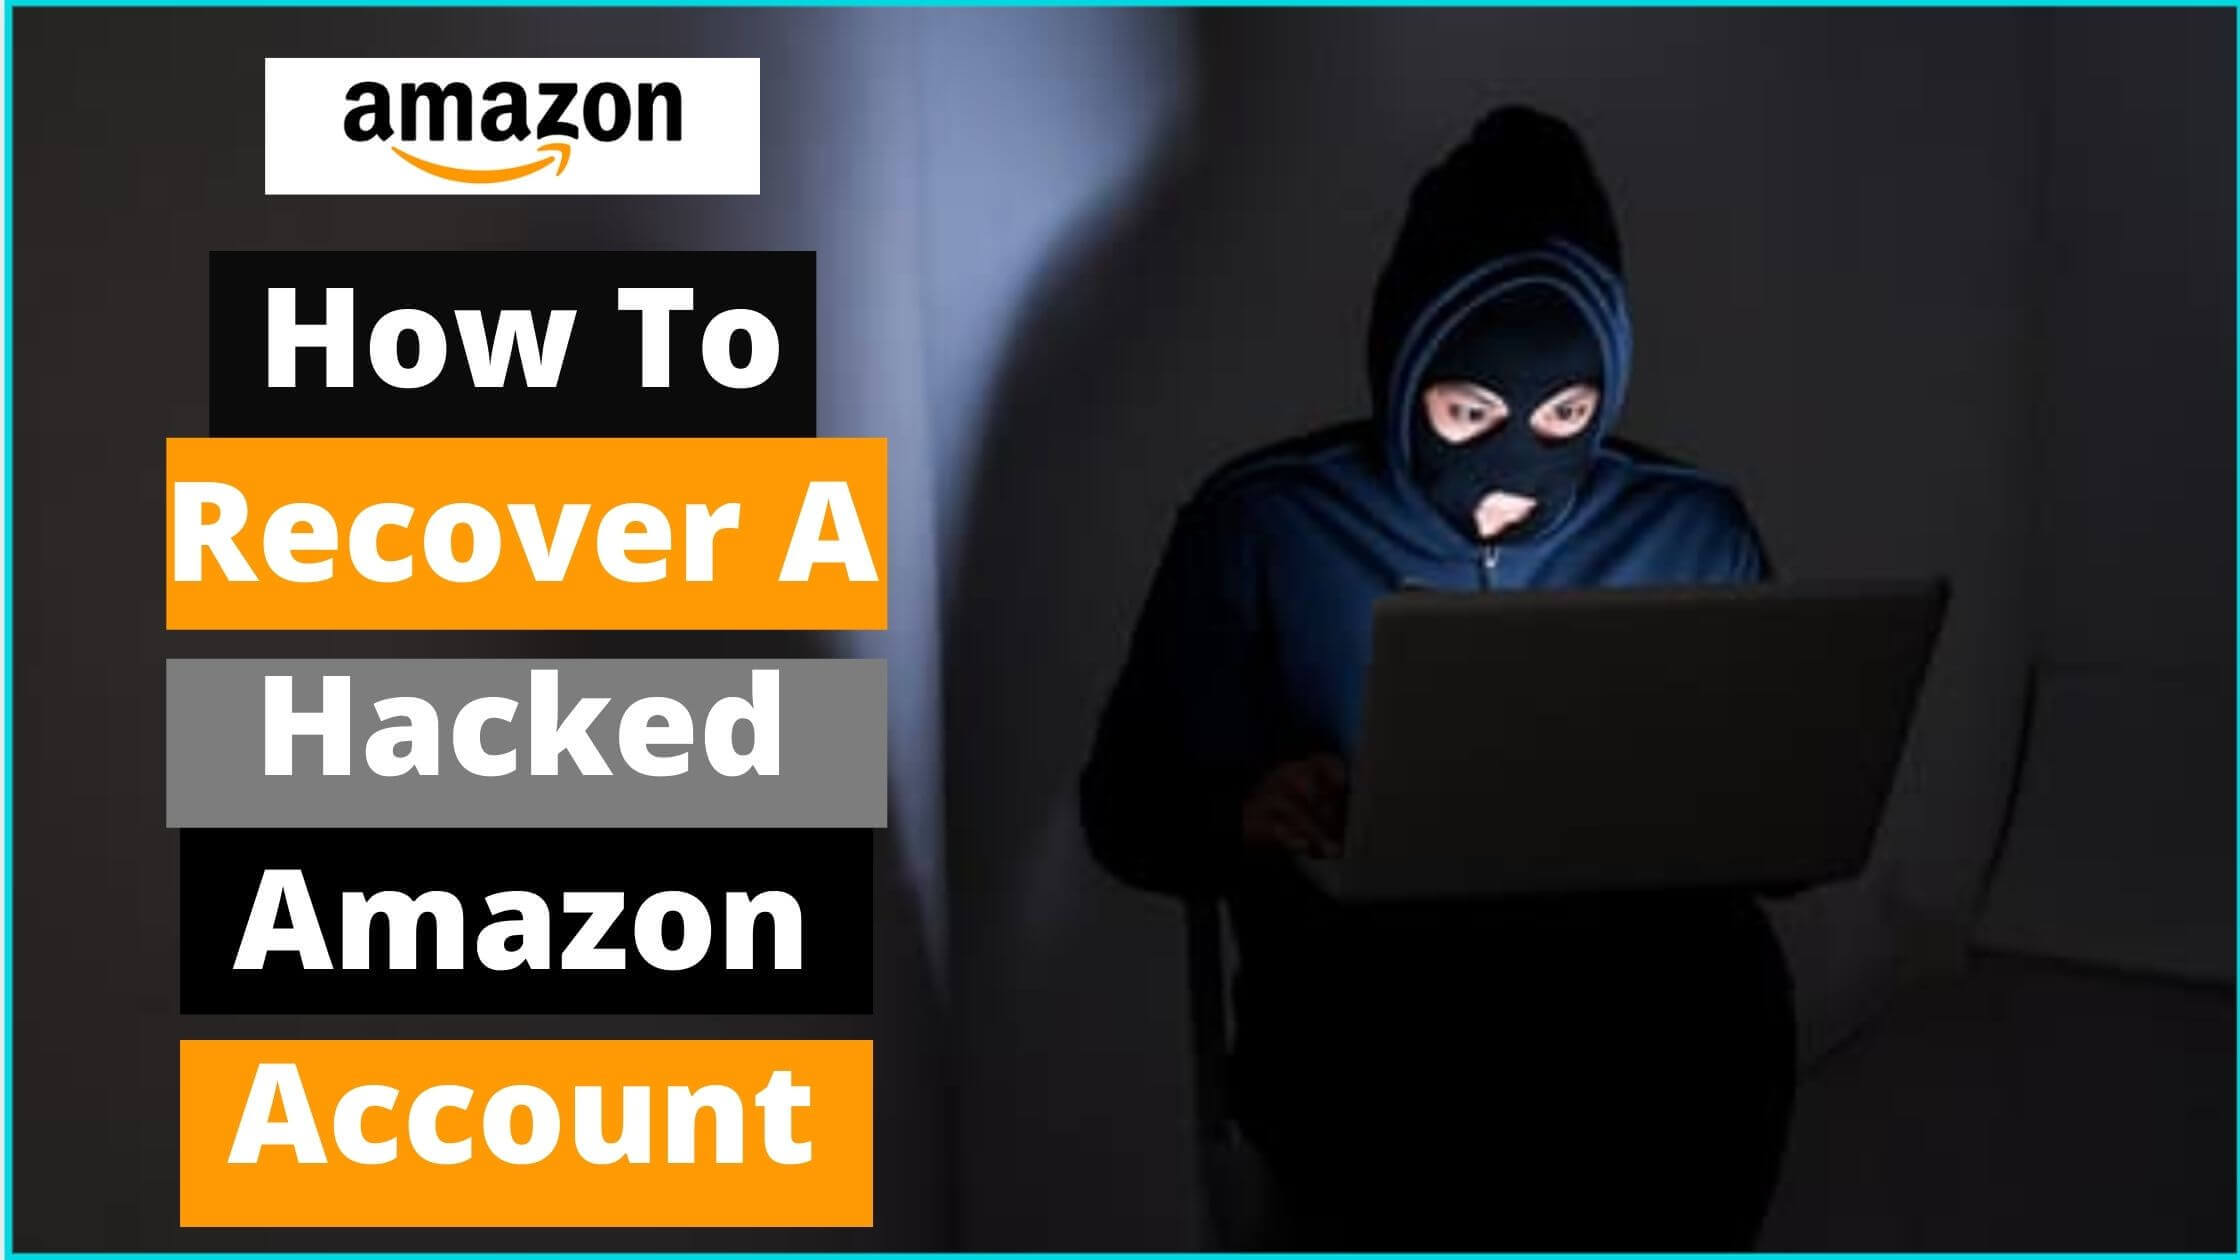 How To Recover a Hacked Amazon Account